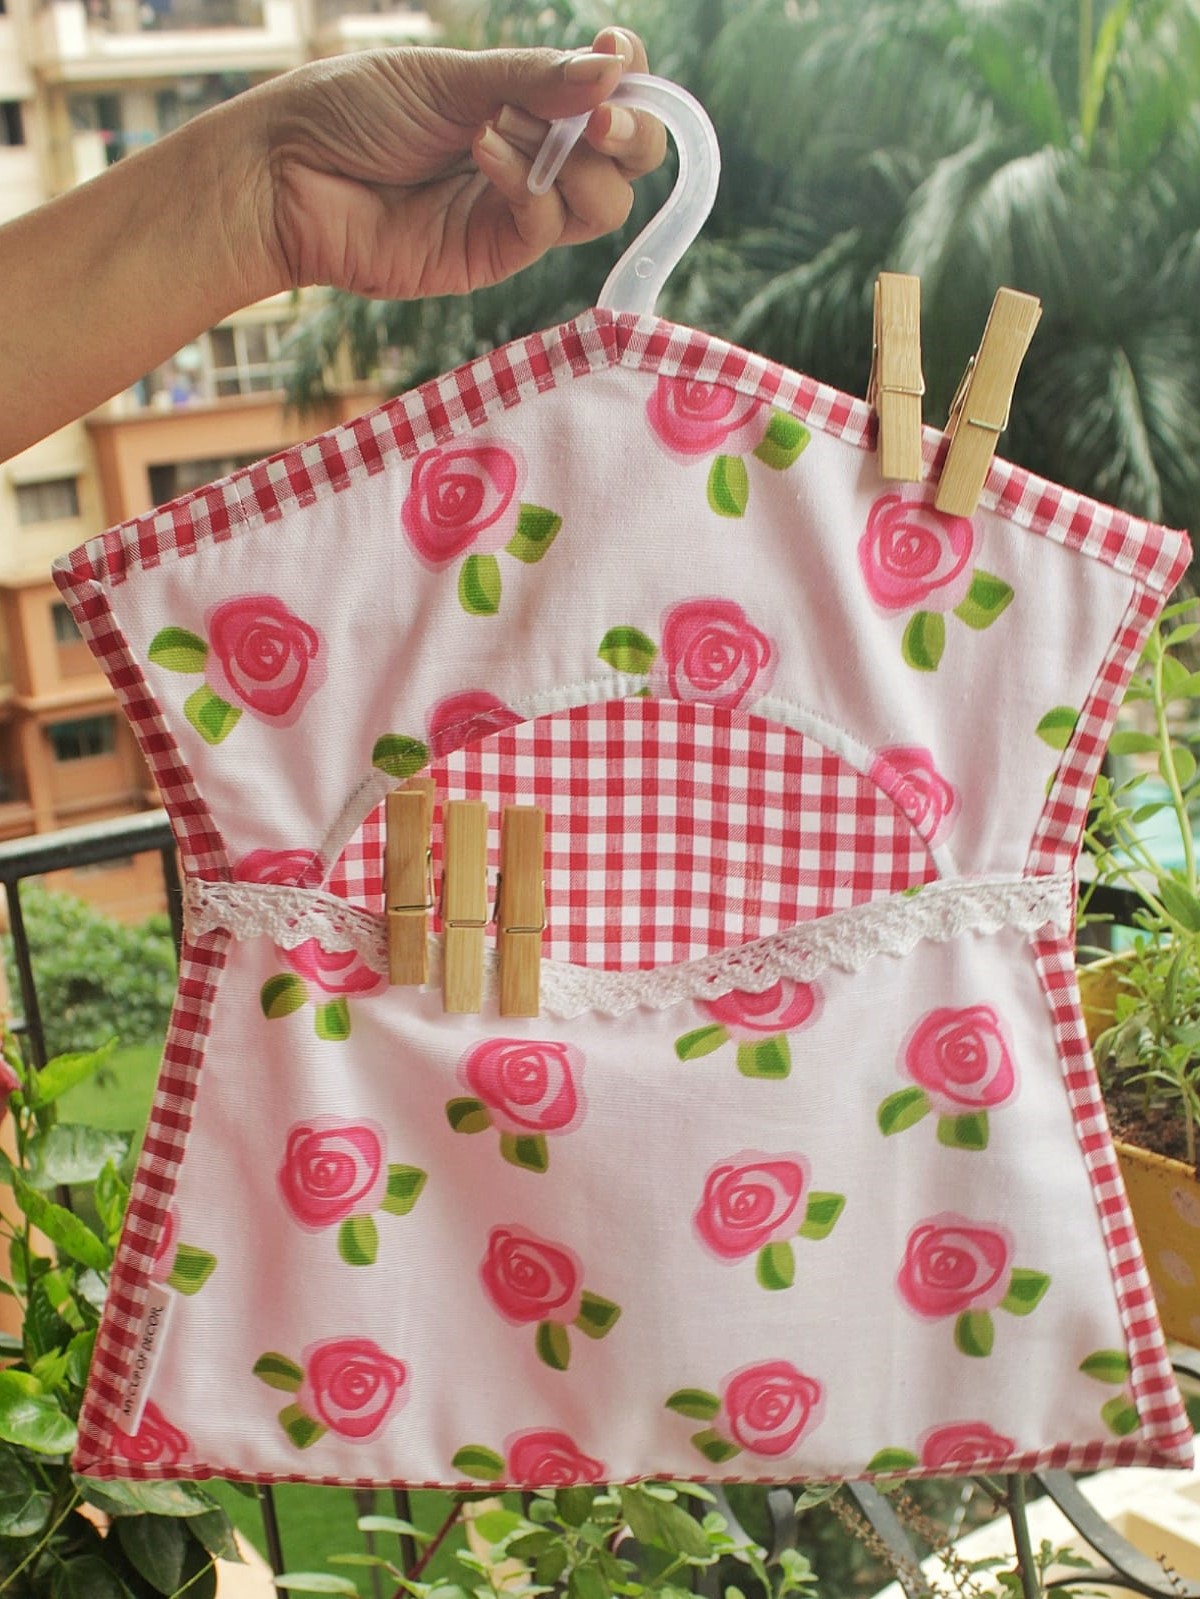 Peg Bag - Cottage core (Floral and gingham themed)